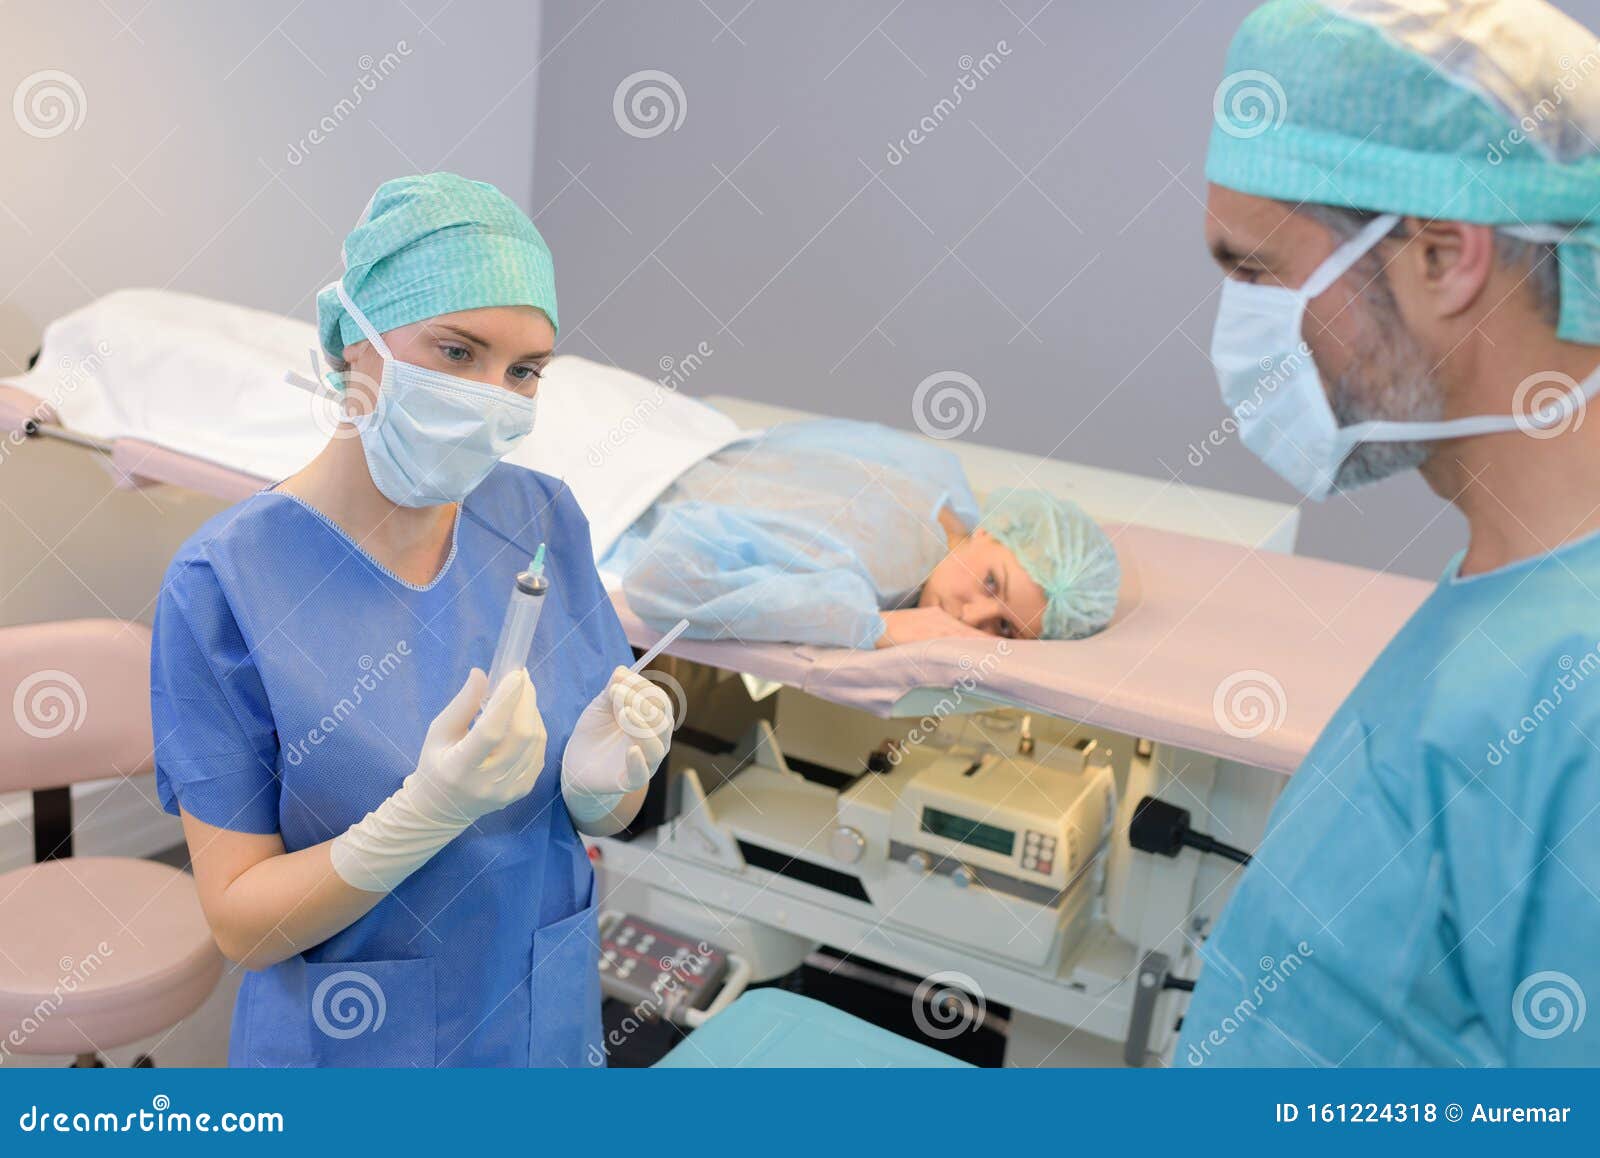 female surgeon anaesthetist at patient operating room